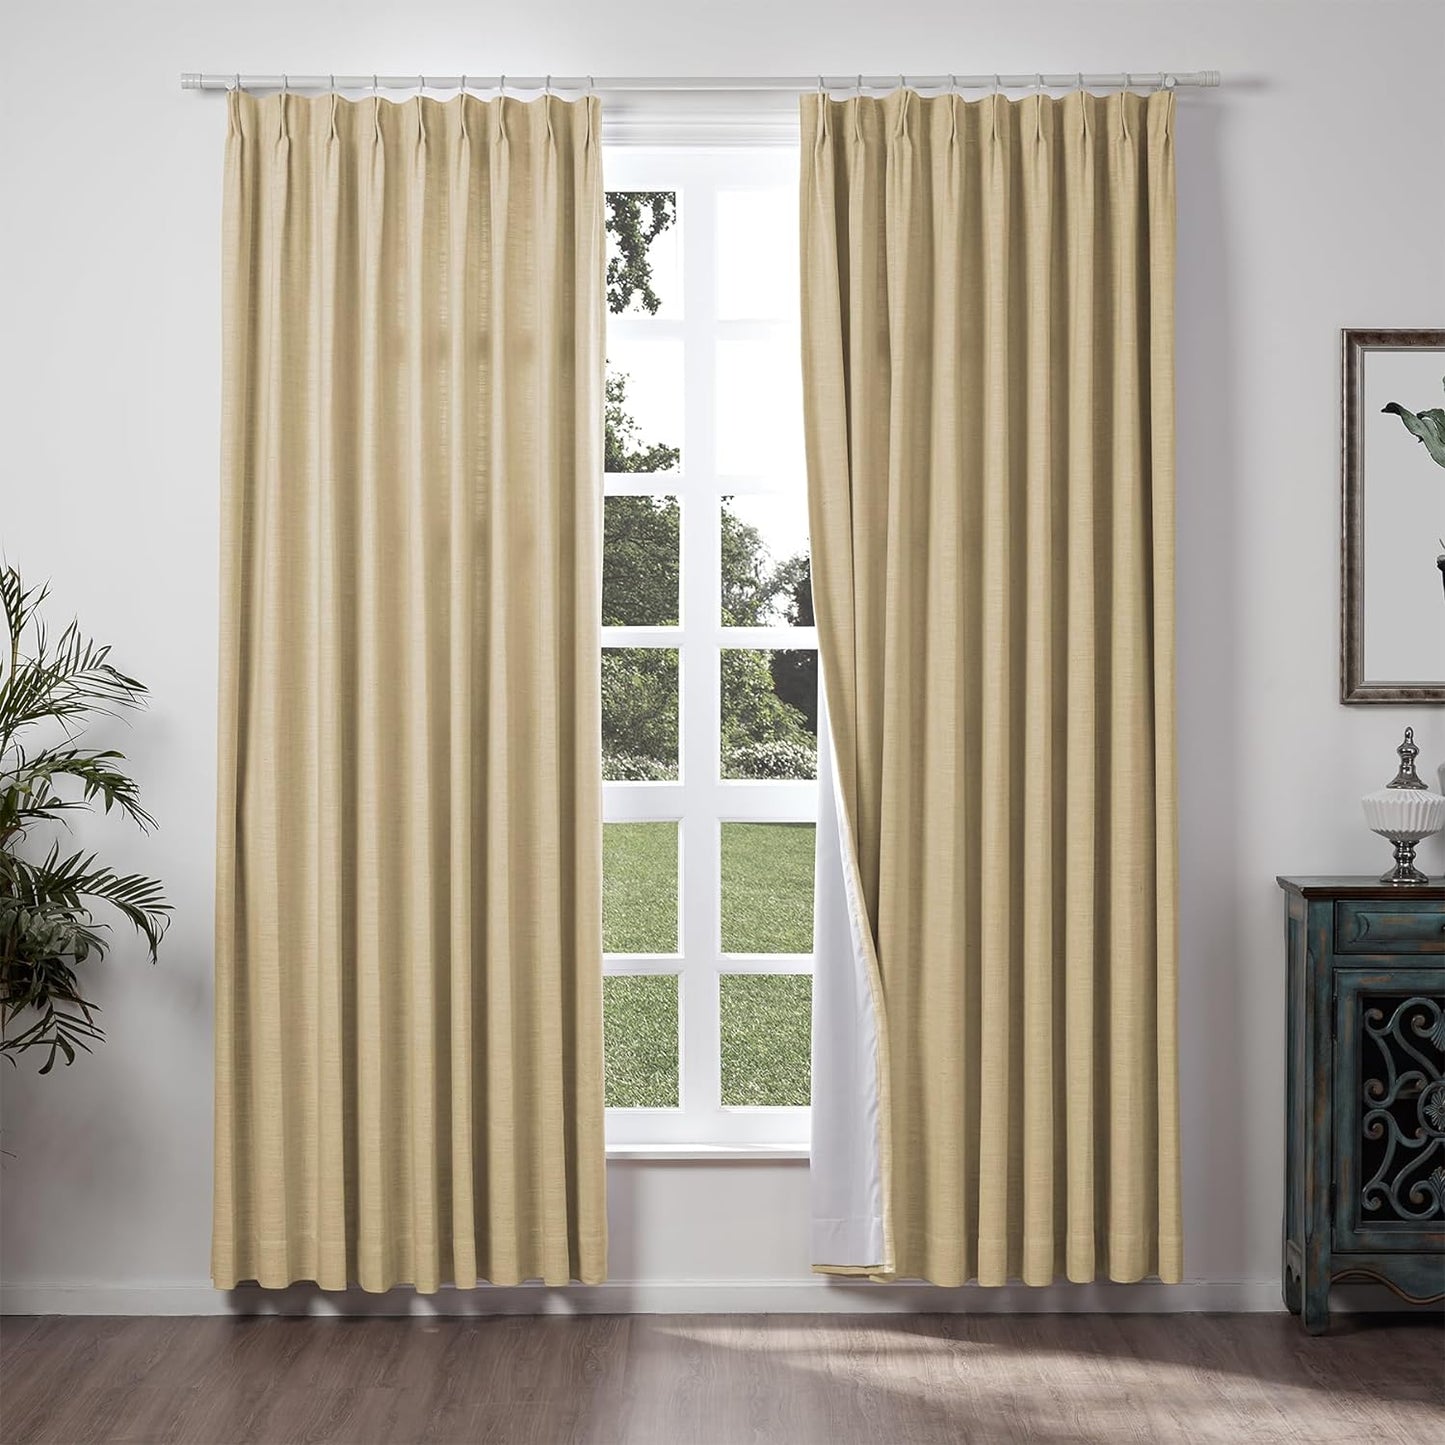 Chadmade 50" W X 63" L Polyester Linen Drape with Blackout Lining Pinch Pleat Curtain for Sliding Door Patio Door Living Room Bedroom, (1 Panel) Sand Beige Tallis Collection  ChadMade Khaki Yellow (27) 72Wx102L 